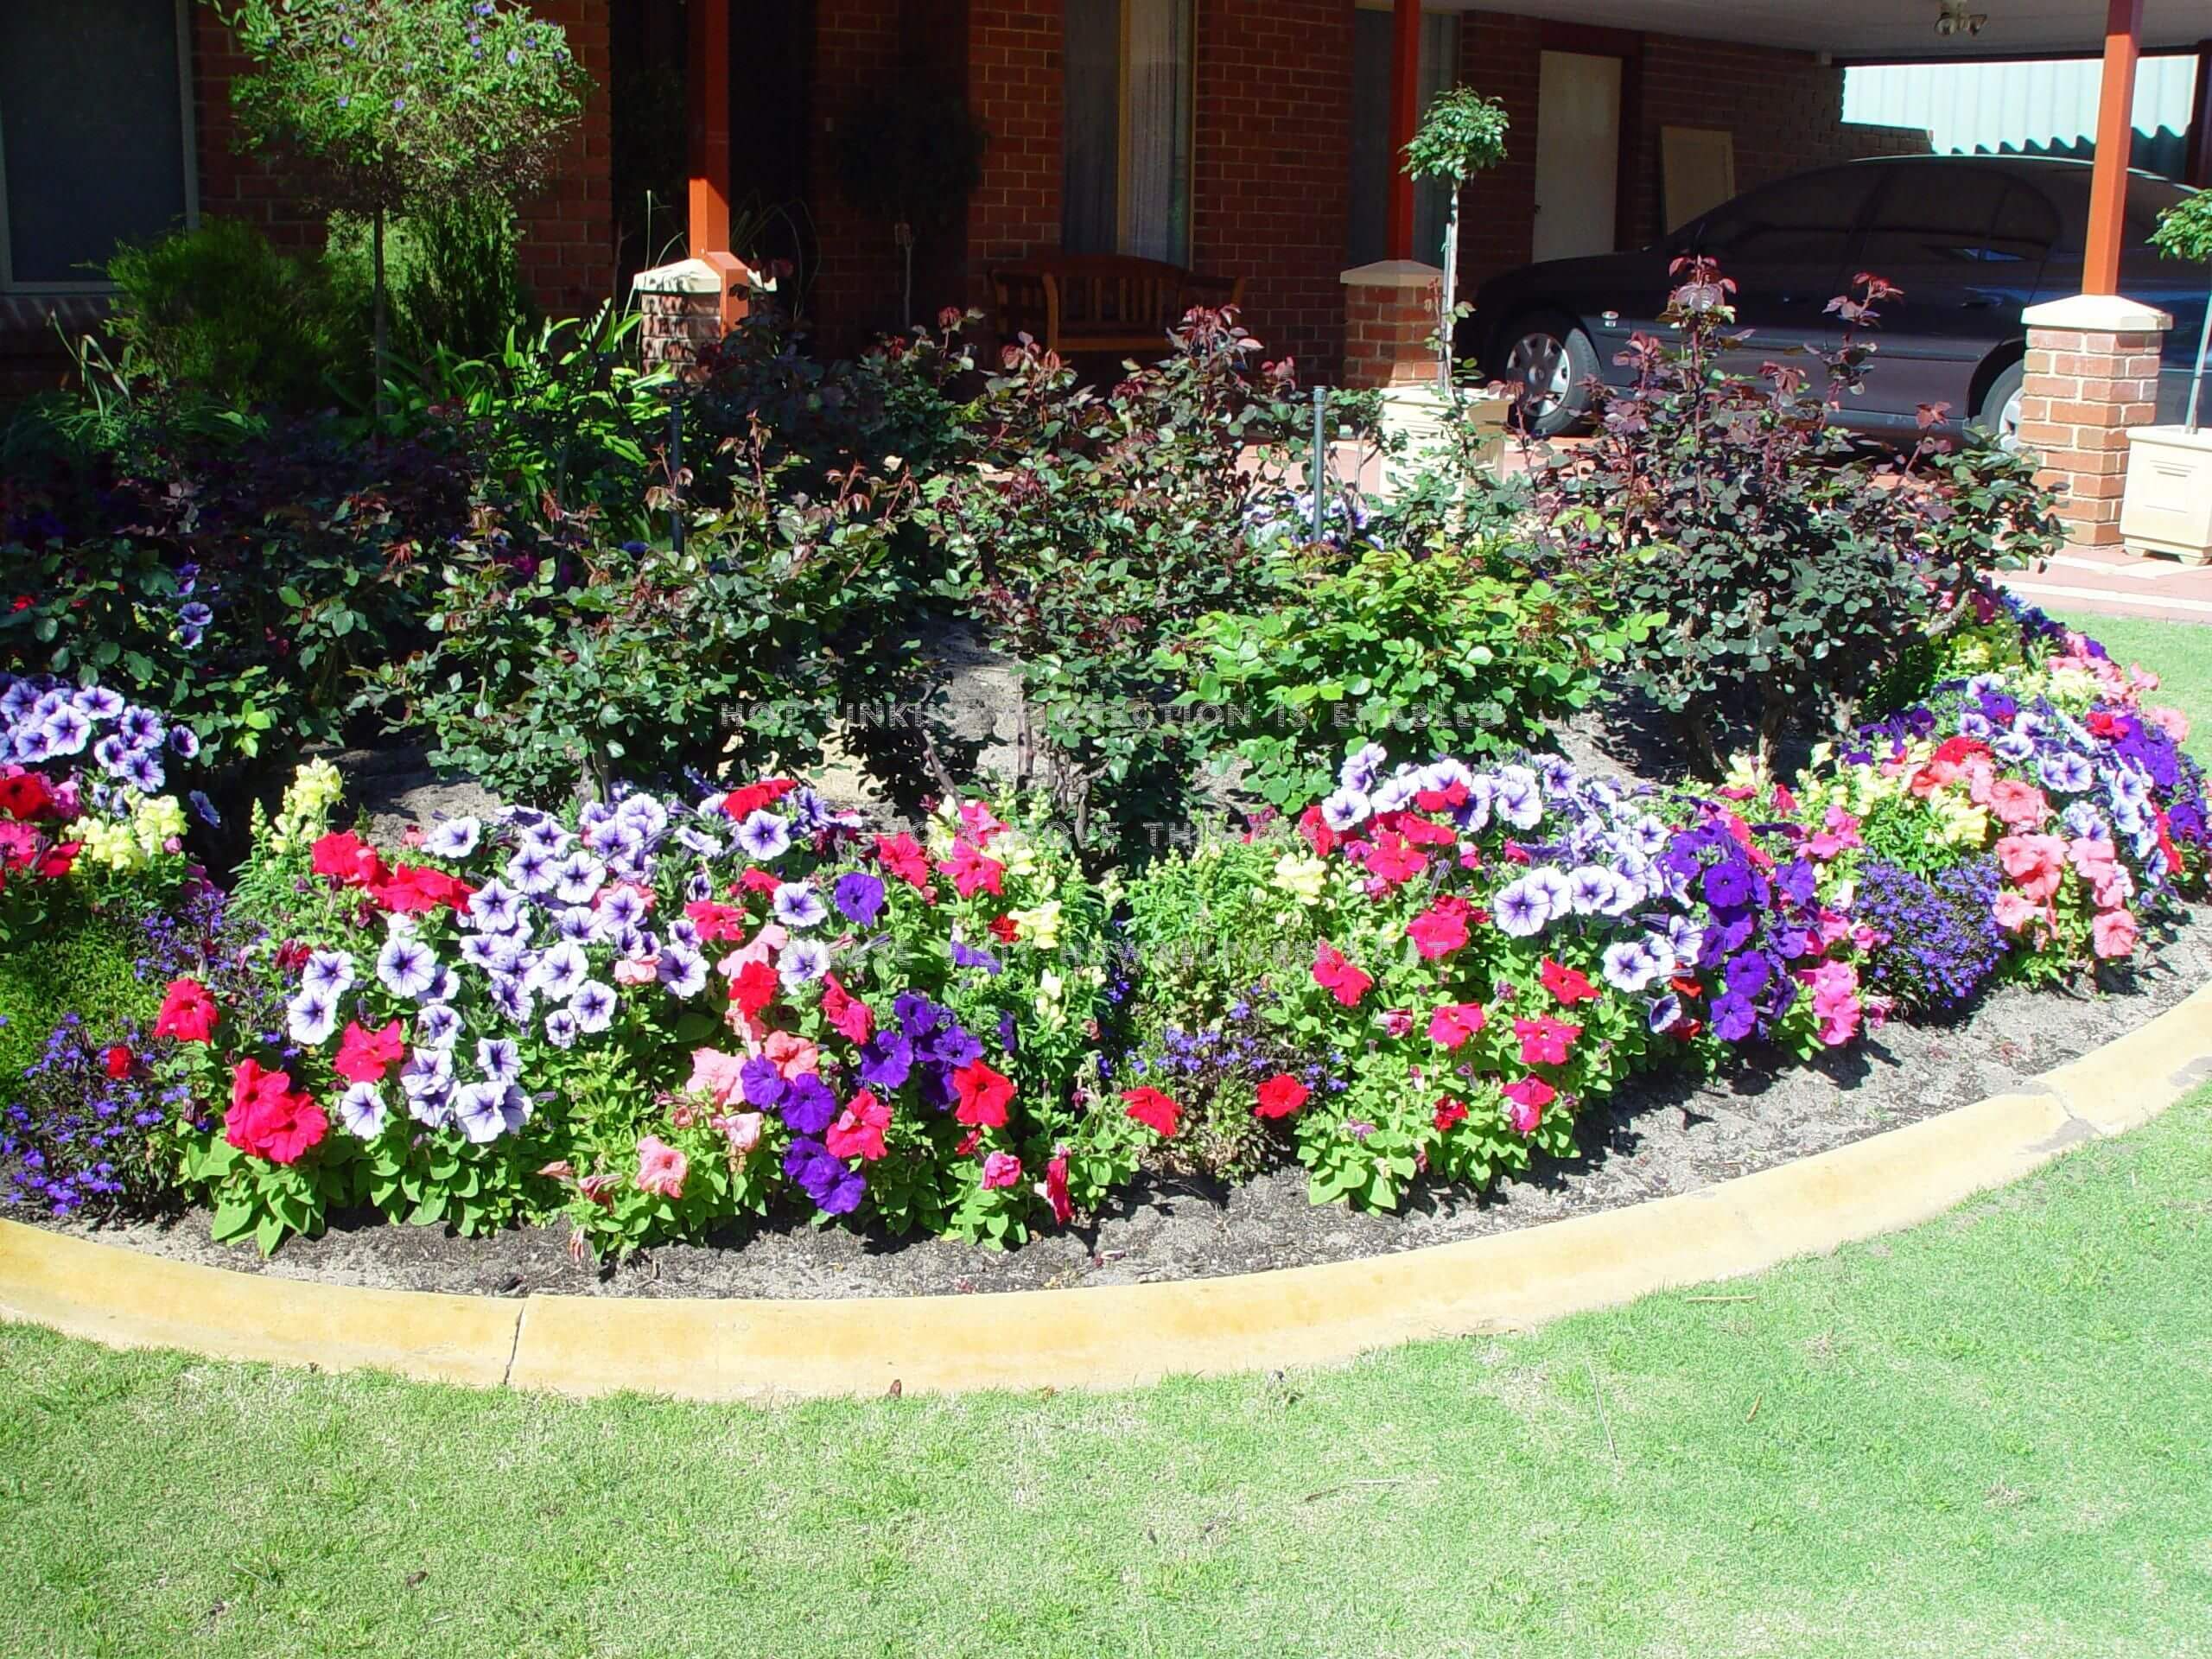 A flower bed in front of a house
